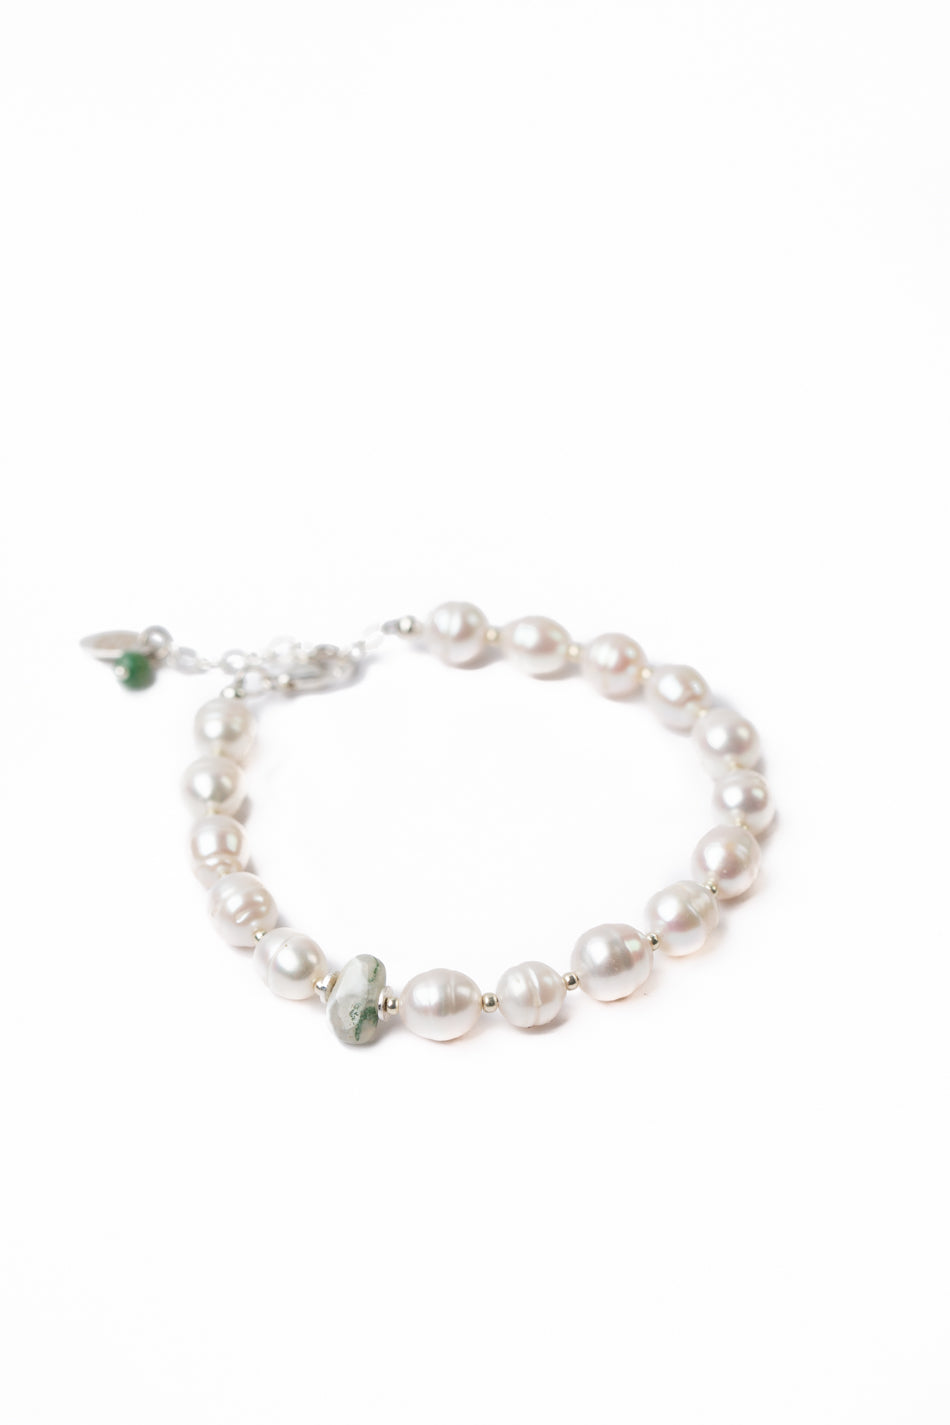 Spring Frost 7.5-8.5" Freshwater Pearl, Moss Agate Simple Bracelet